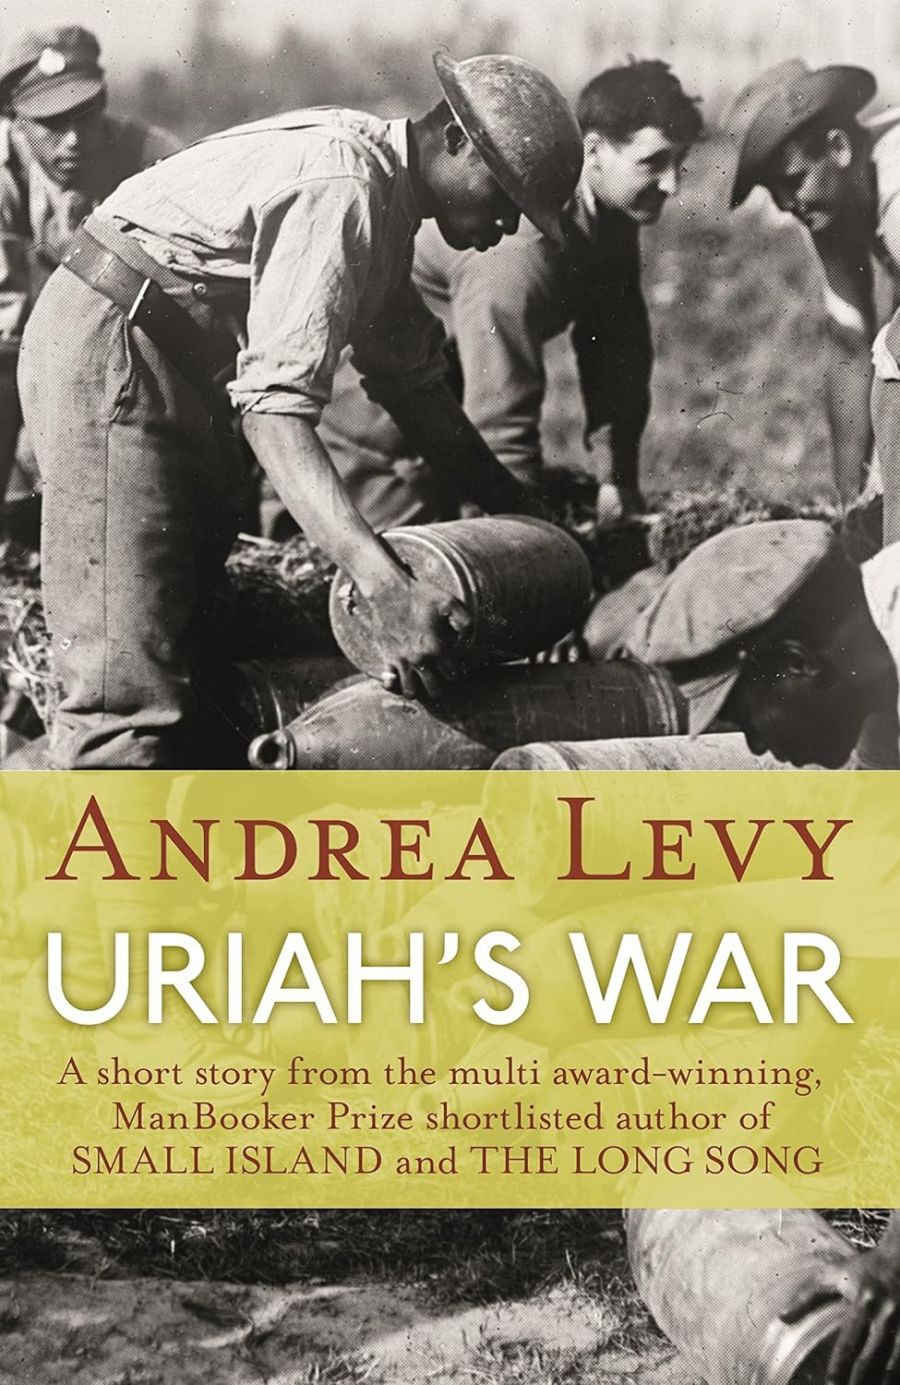 book cover with 1940s war photo of soldiers stacking munitions.